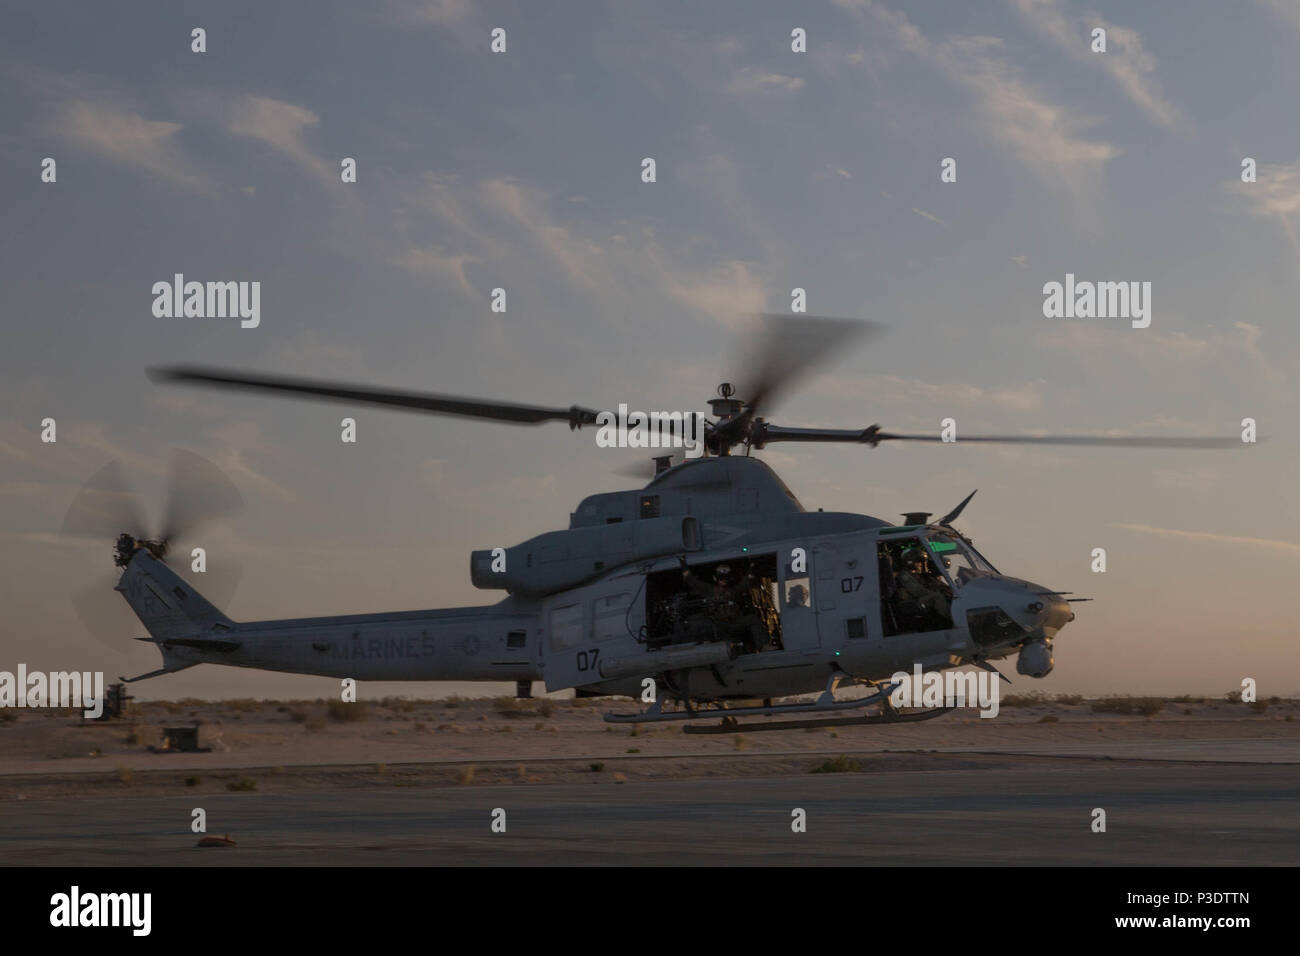 Marines with Marine Light Attack Helicopter Squadron 775, Marine Aircraft Group-41, 4th Marine Aircraft Wing, take off in a UH-1Y Venom for night operations during Integrated Training Exercise 4-18 at Marine Corps Air Ground Combat Center Twentynine Palms, California, June 12, 2018. HMLA-775, also known as the “Coyotes”, provides air combat element support to Marine Air Ground Task Force 23 during ITX 4-18.  (U.S. Marine Corps photo by Lance Cpl. Samantha Schwoch/released) Stock Photo